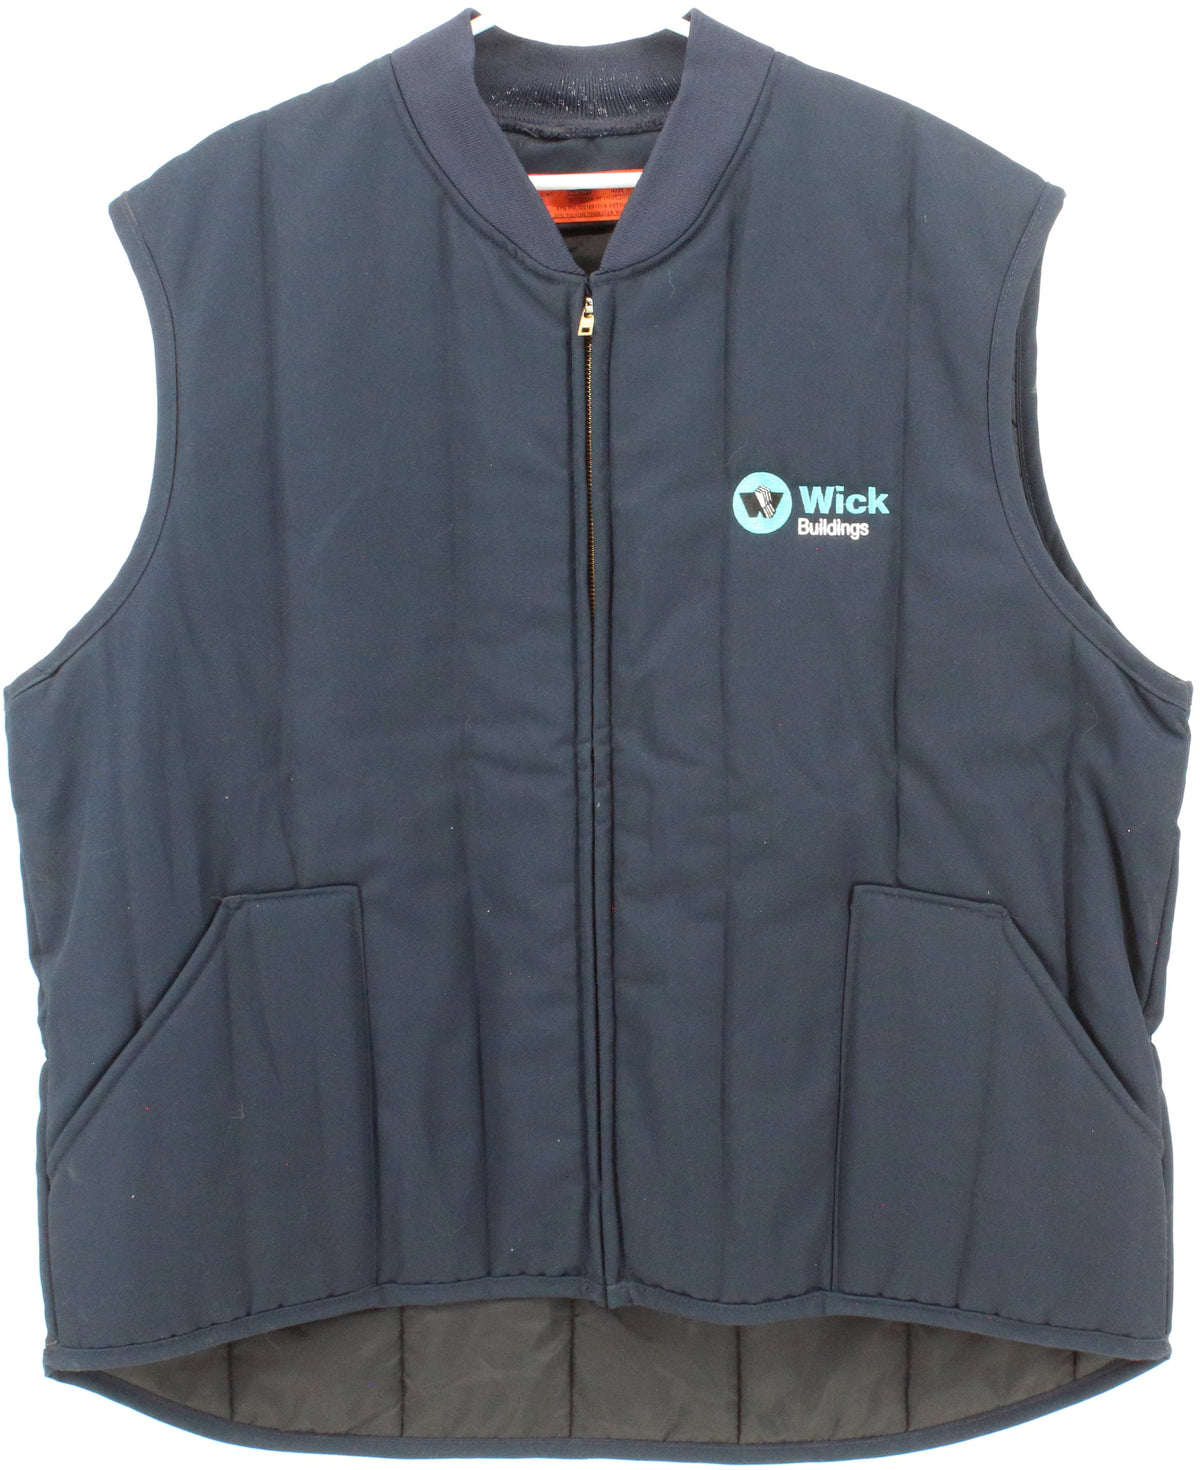 Red Kap Wick Buildings Navy Blue Quilted Vest